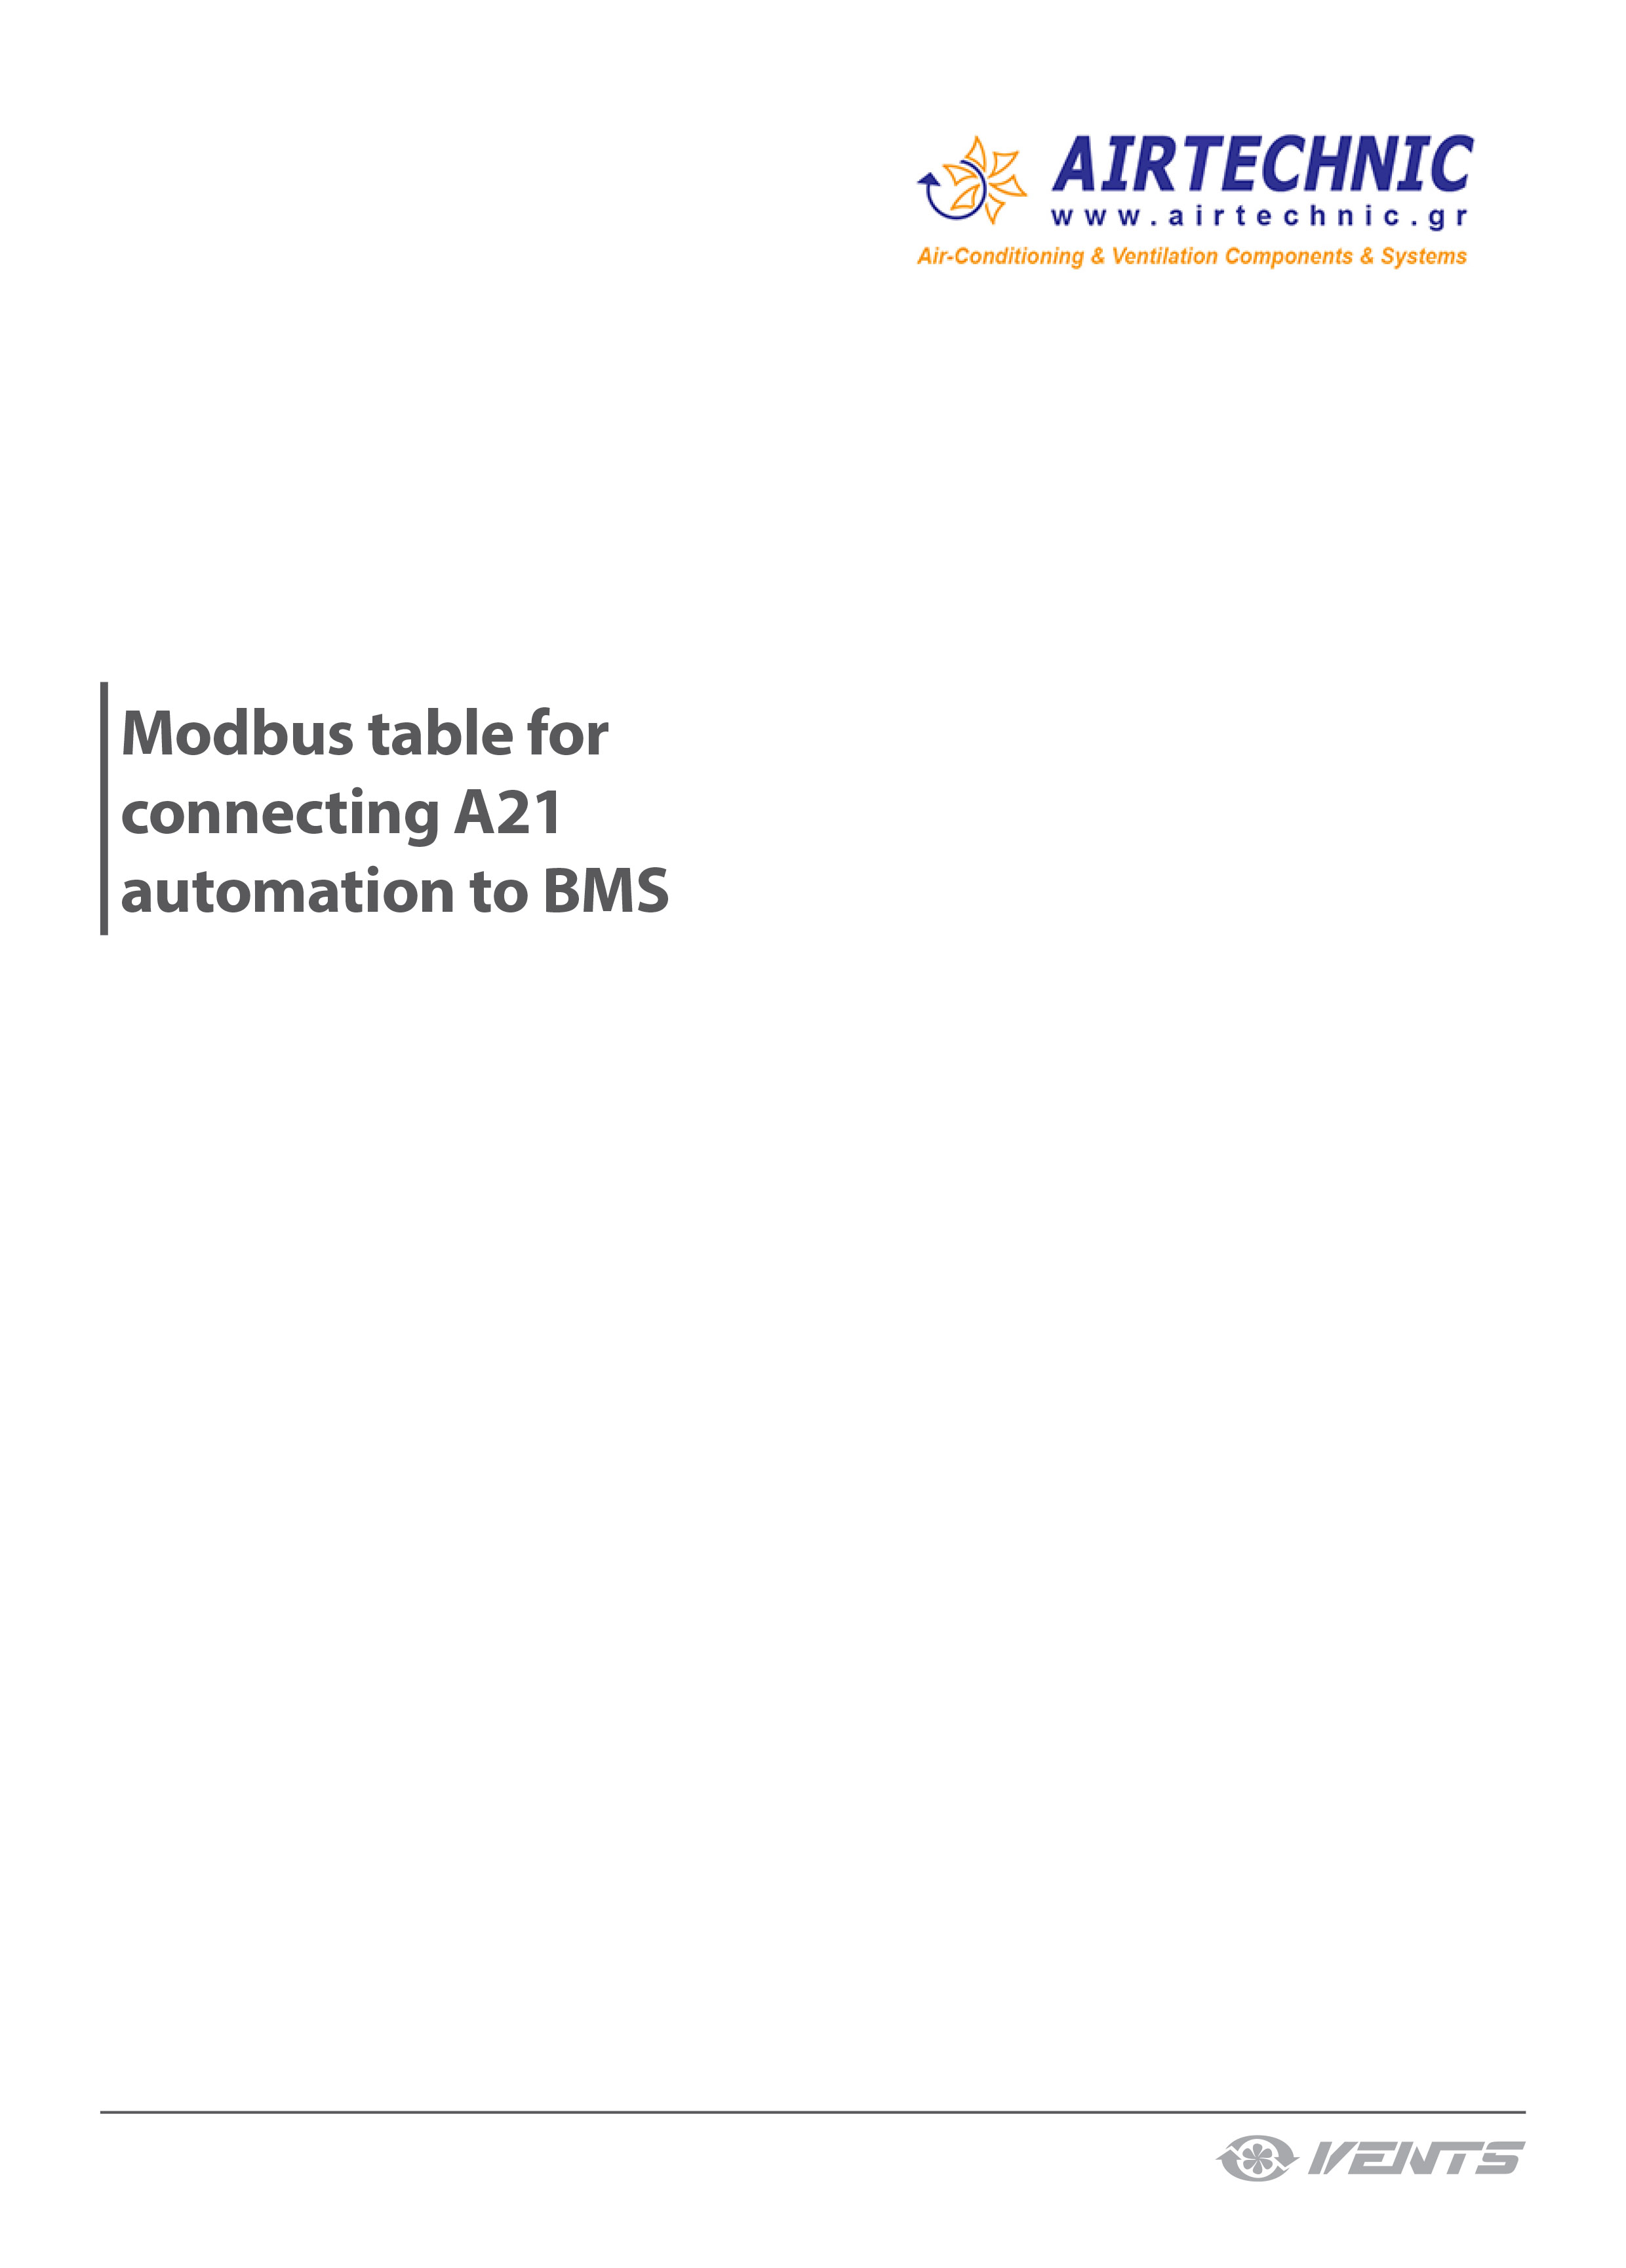 USER's MANUAL "Modbus table for connecting A21 automation to BMS"